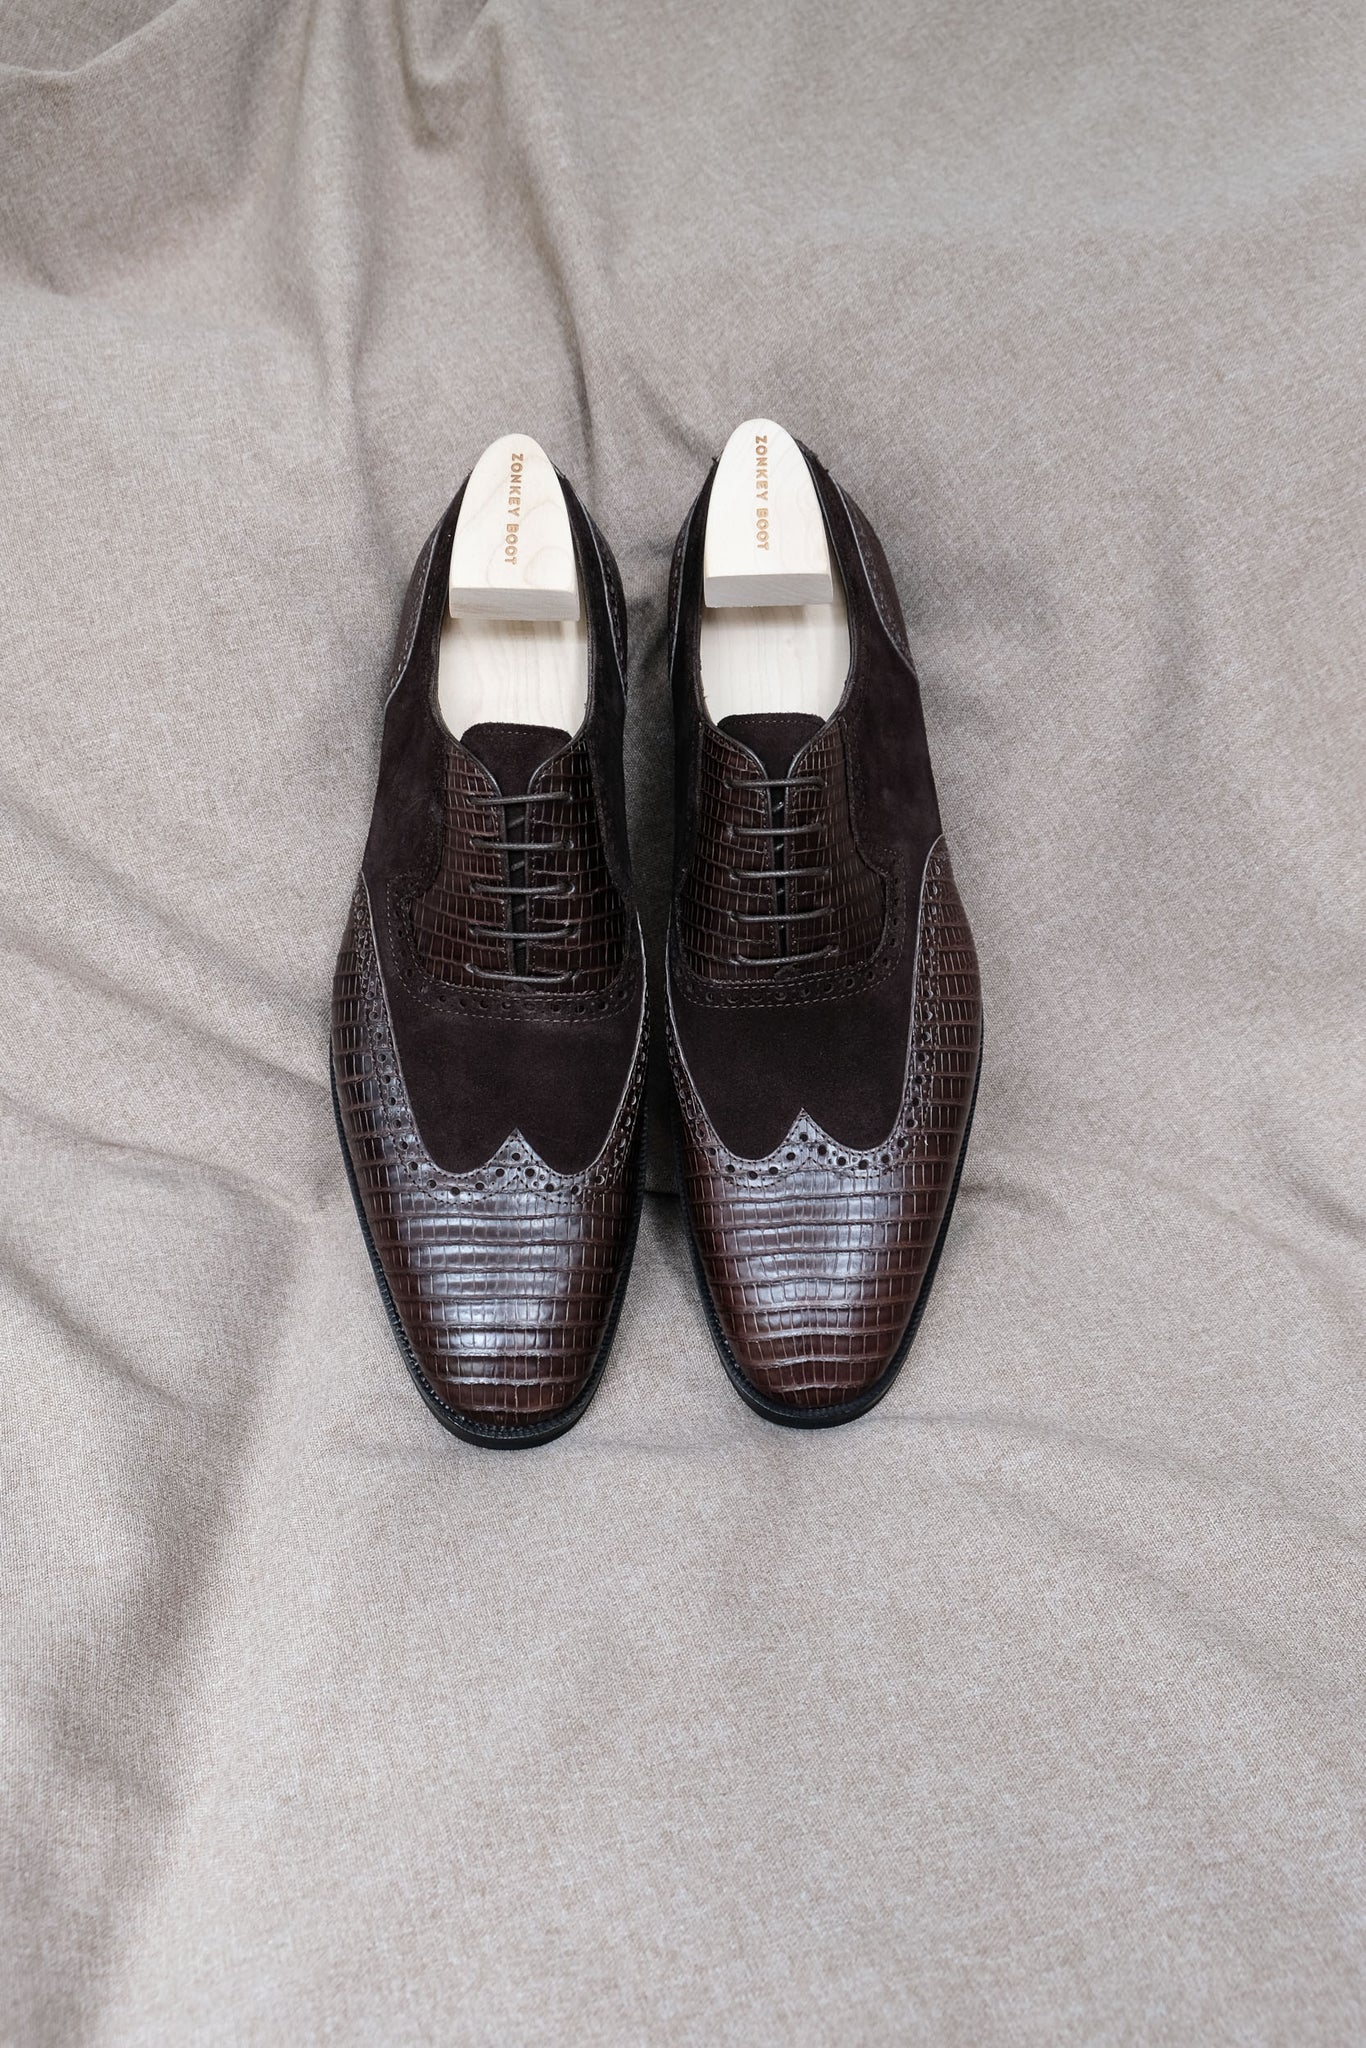 Zonkey Boot hand welted wingtip oxfords from lizard leather and suede